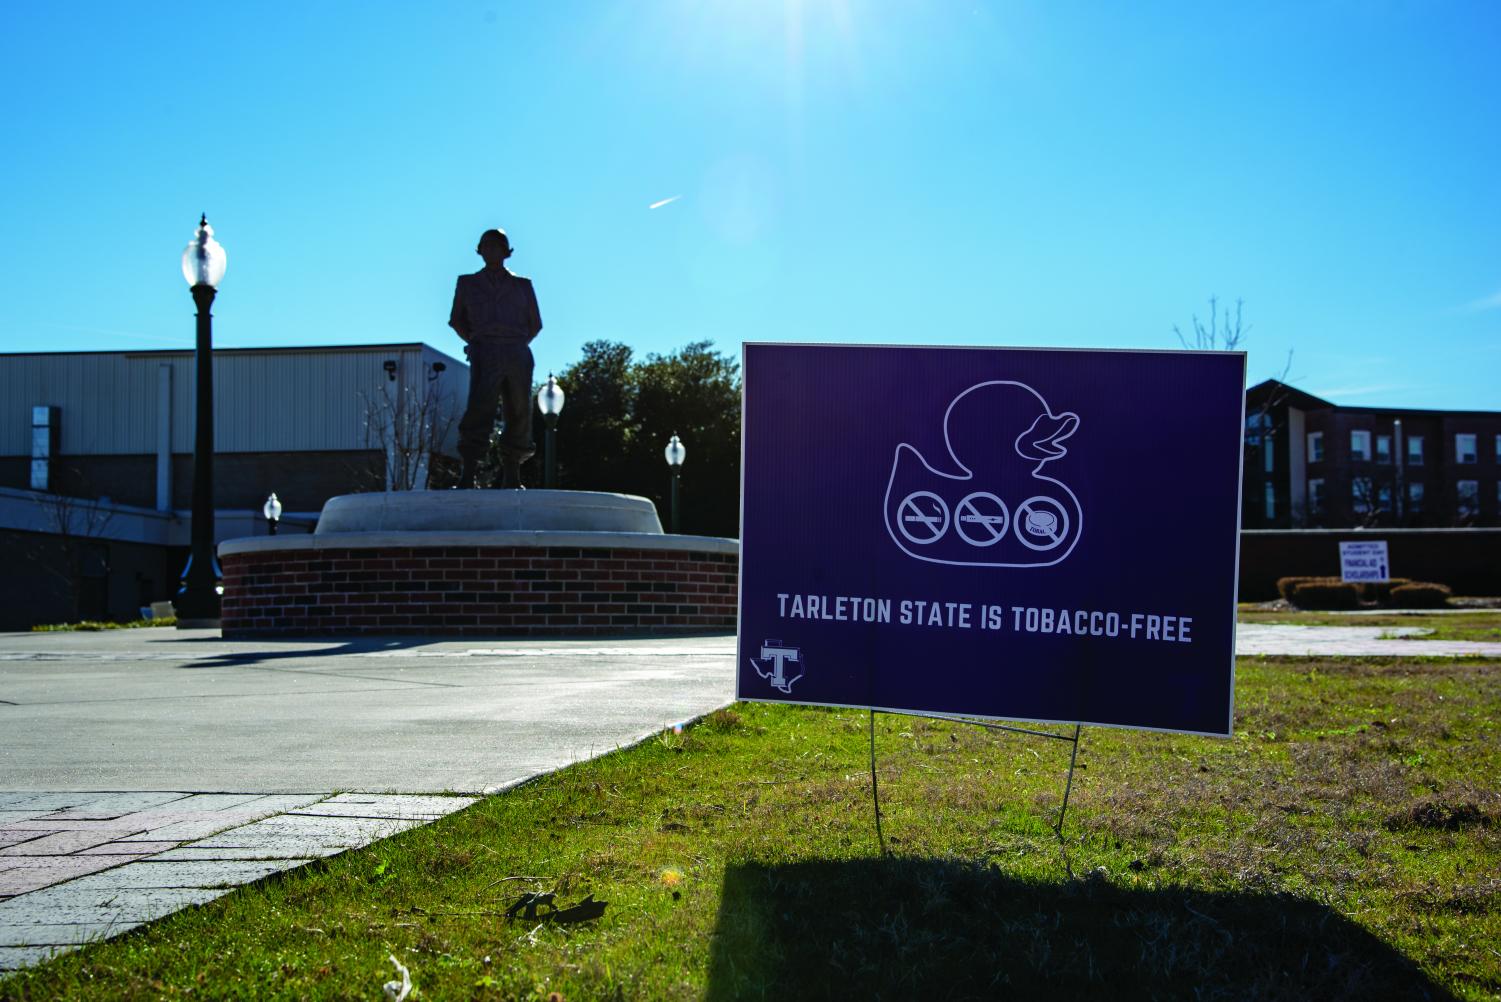 Tarleton S Tobacco Free Policy Promotes Healthy Living The Jtac